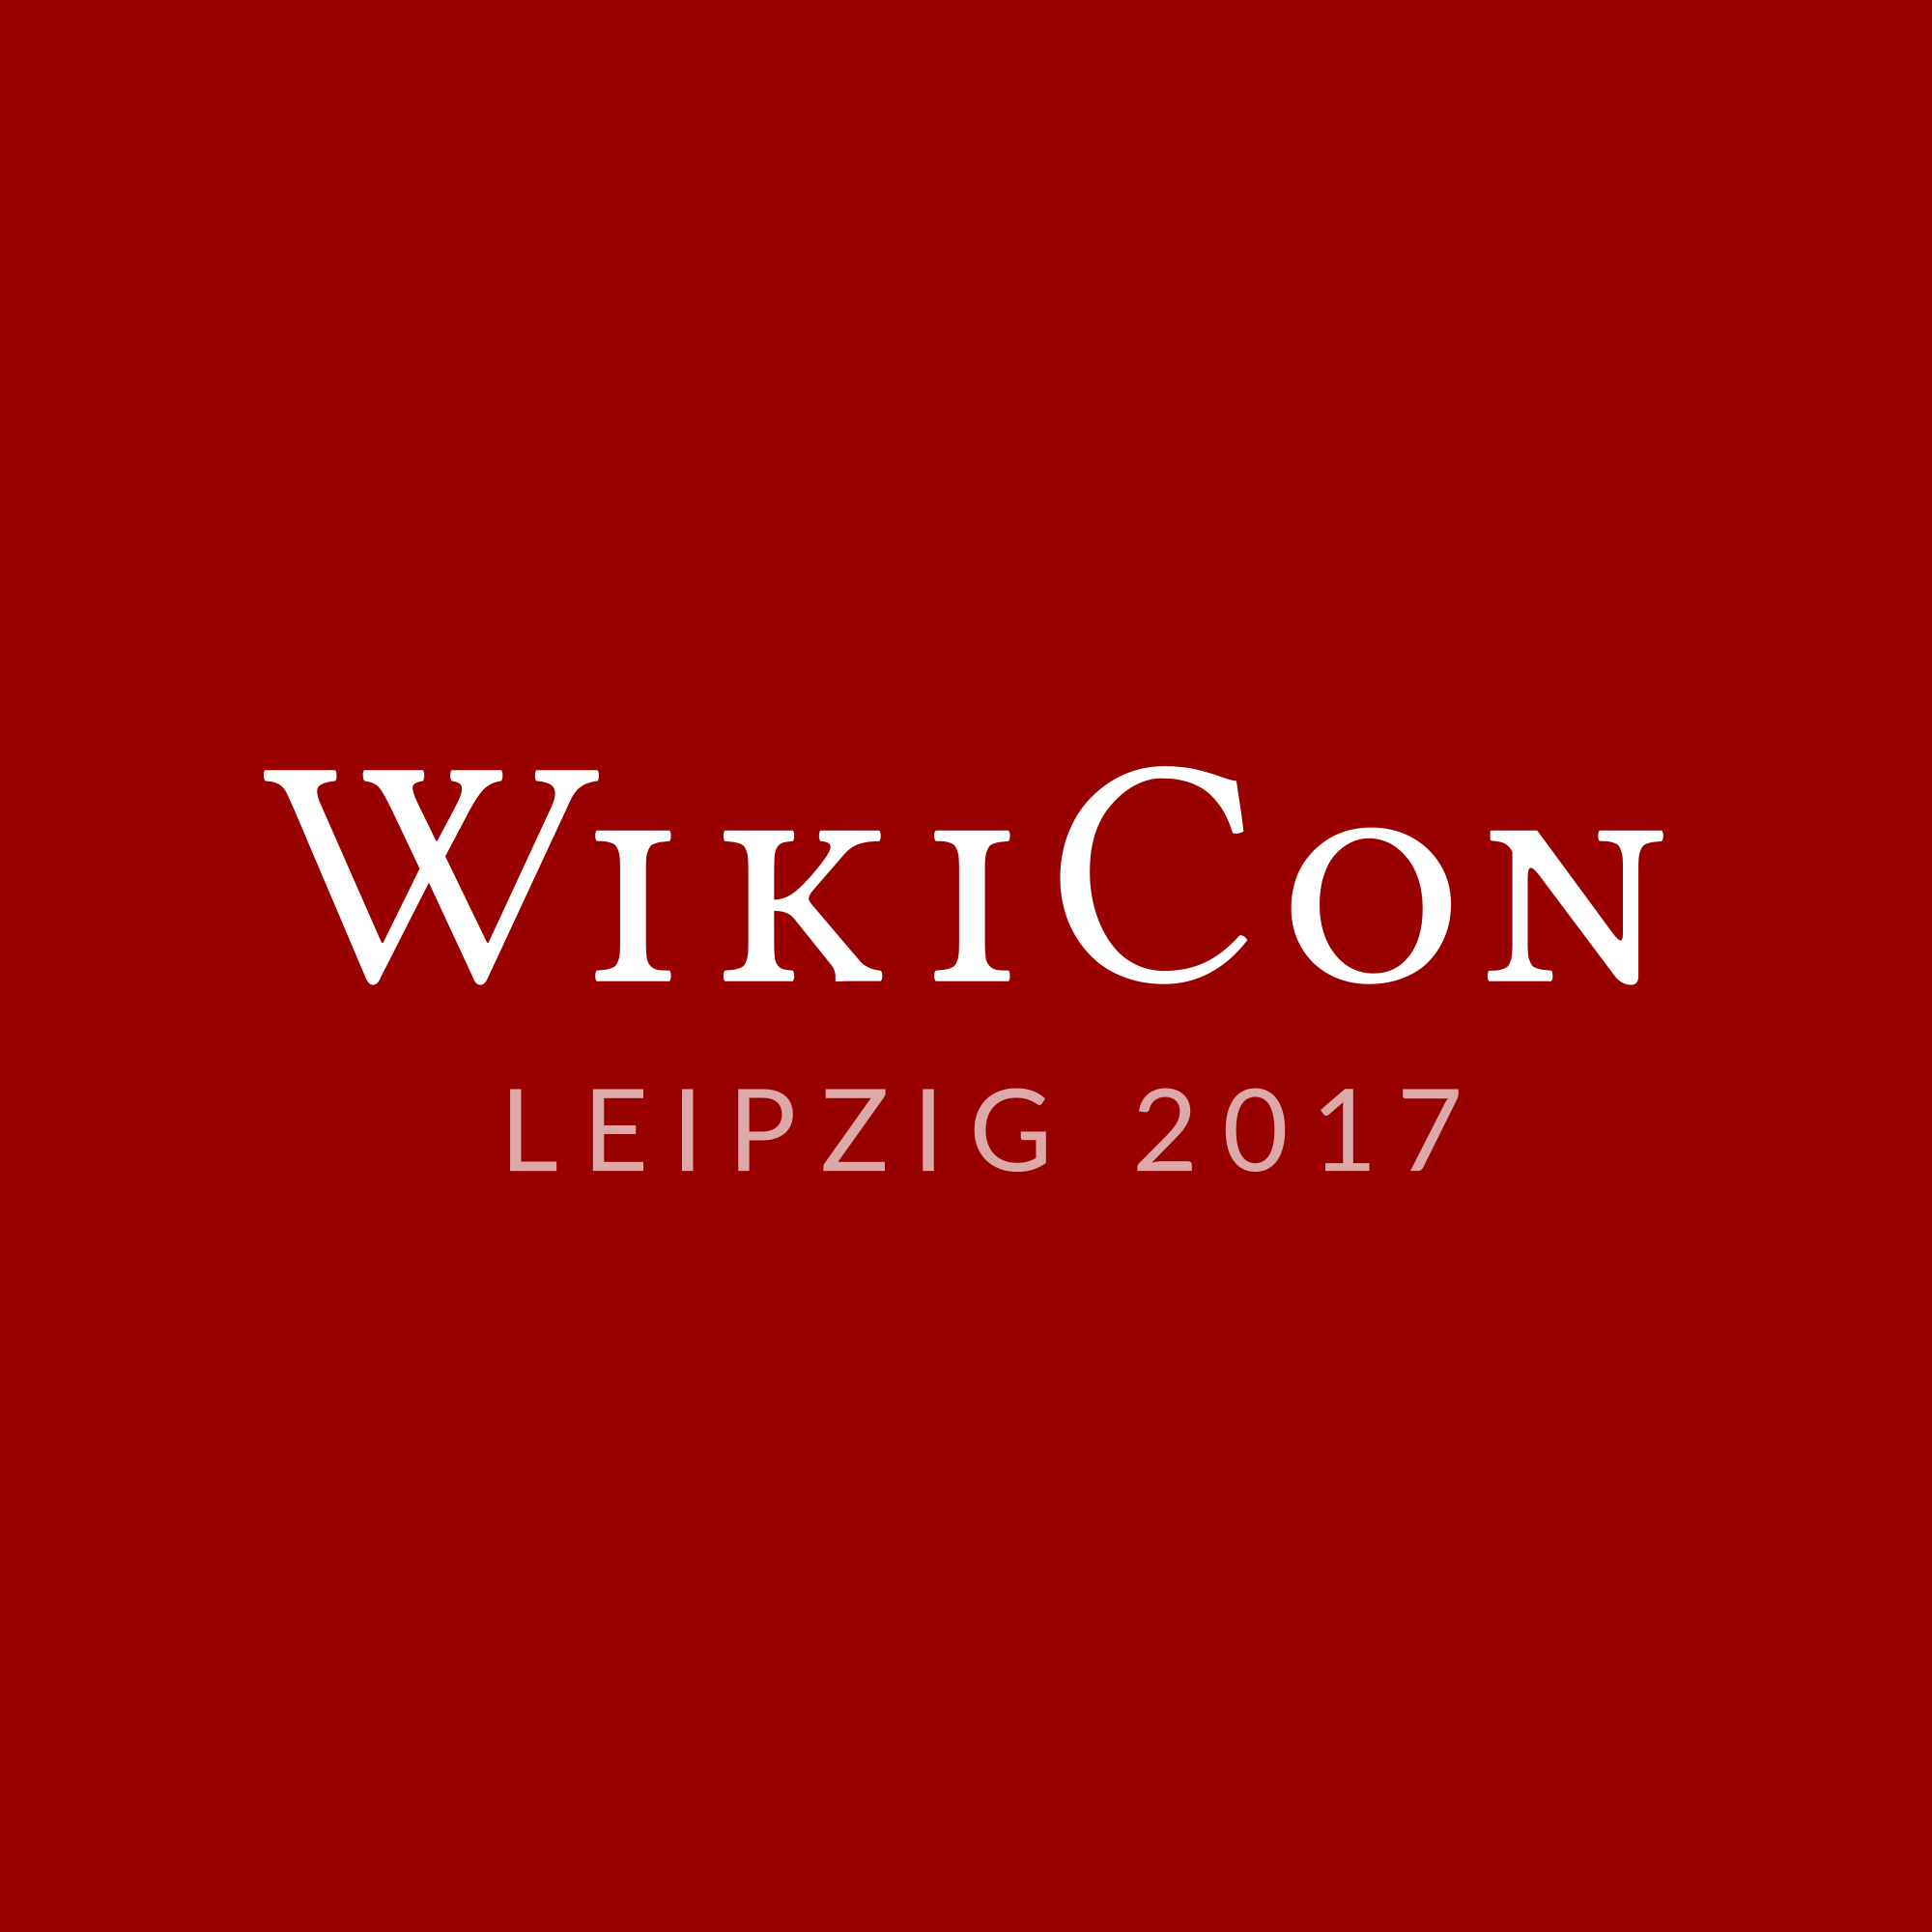 Red Square as Logo - File:WikiCon-Logo-red-square.svg - Wikimedia Commons